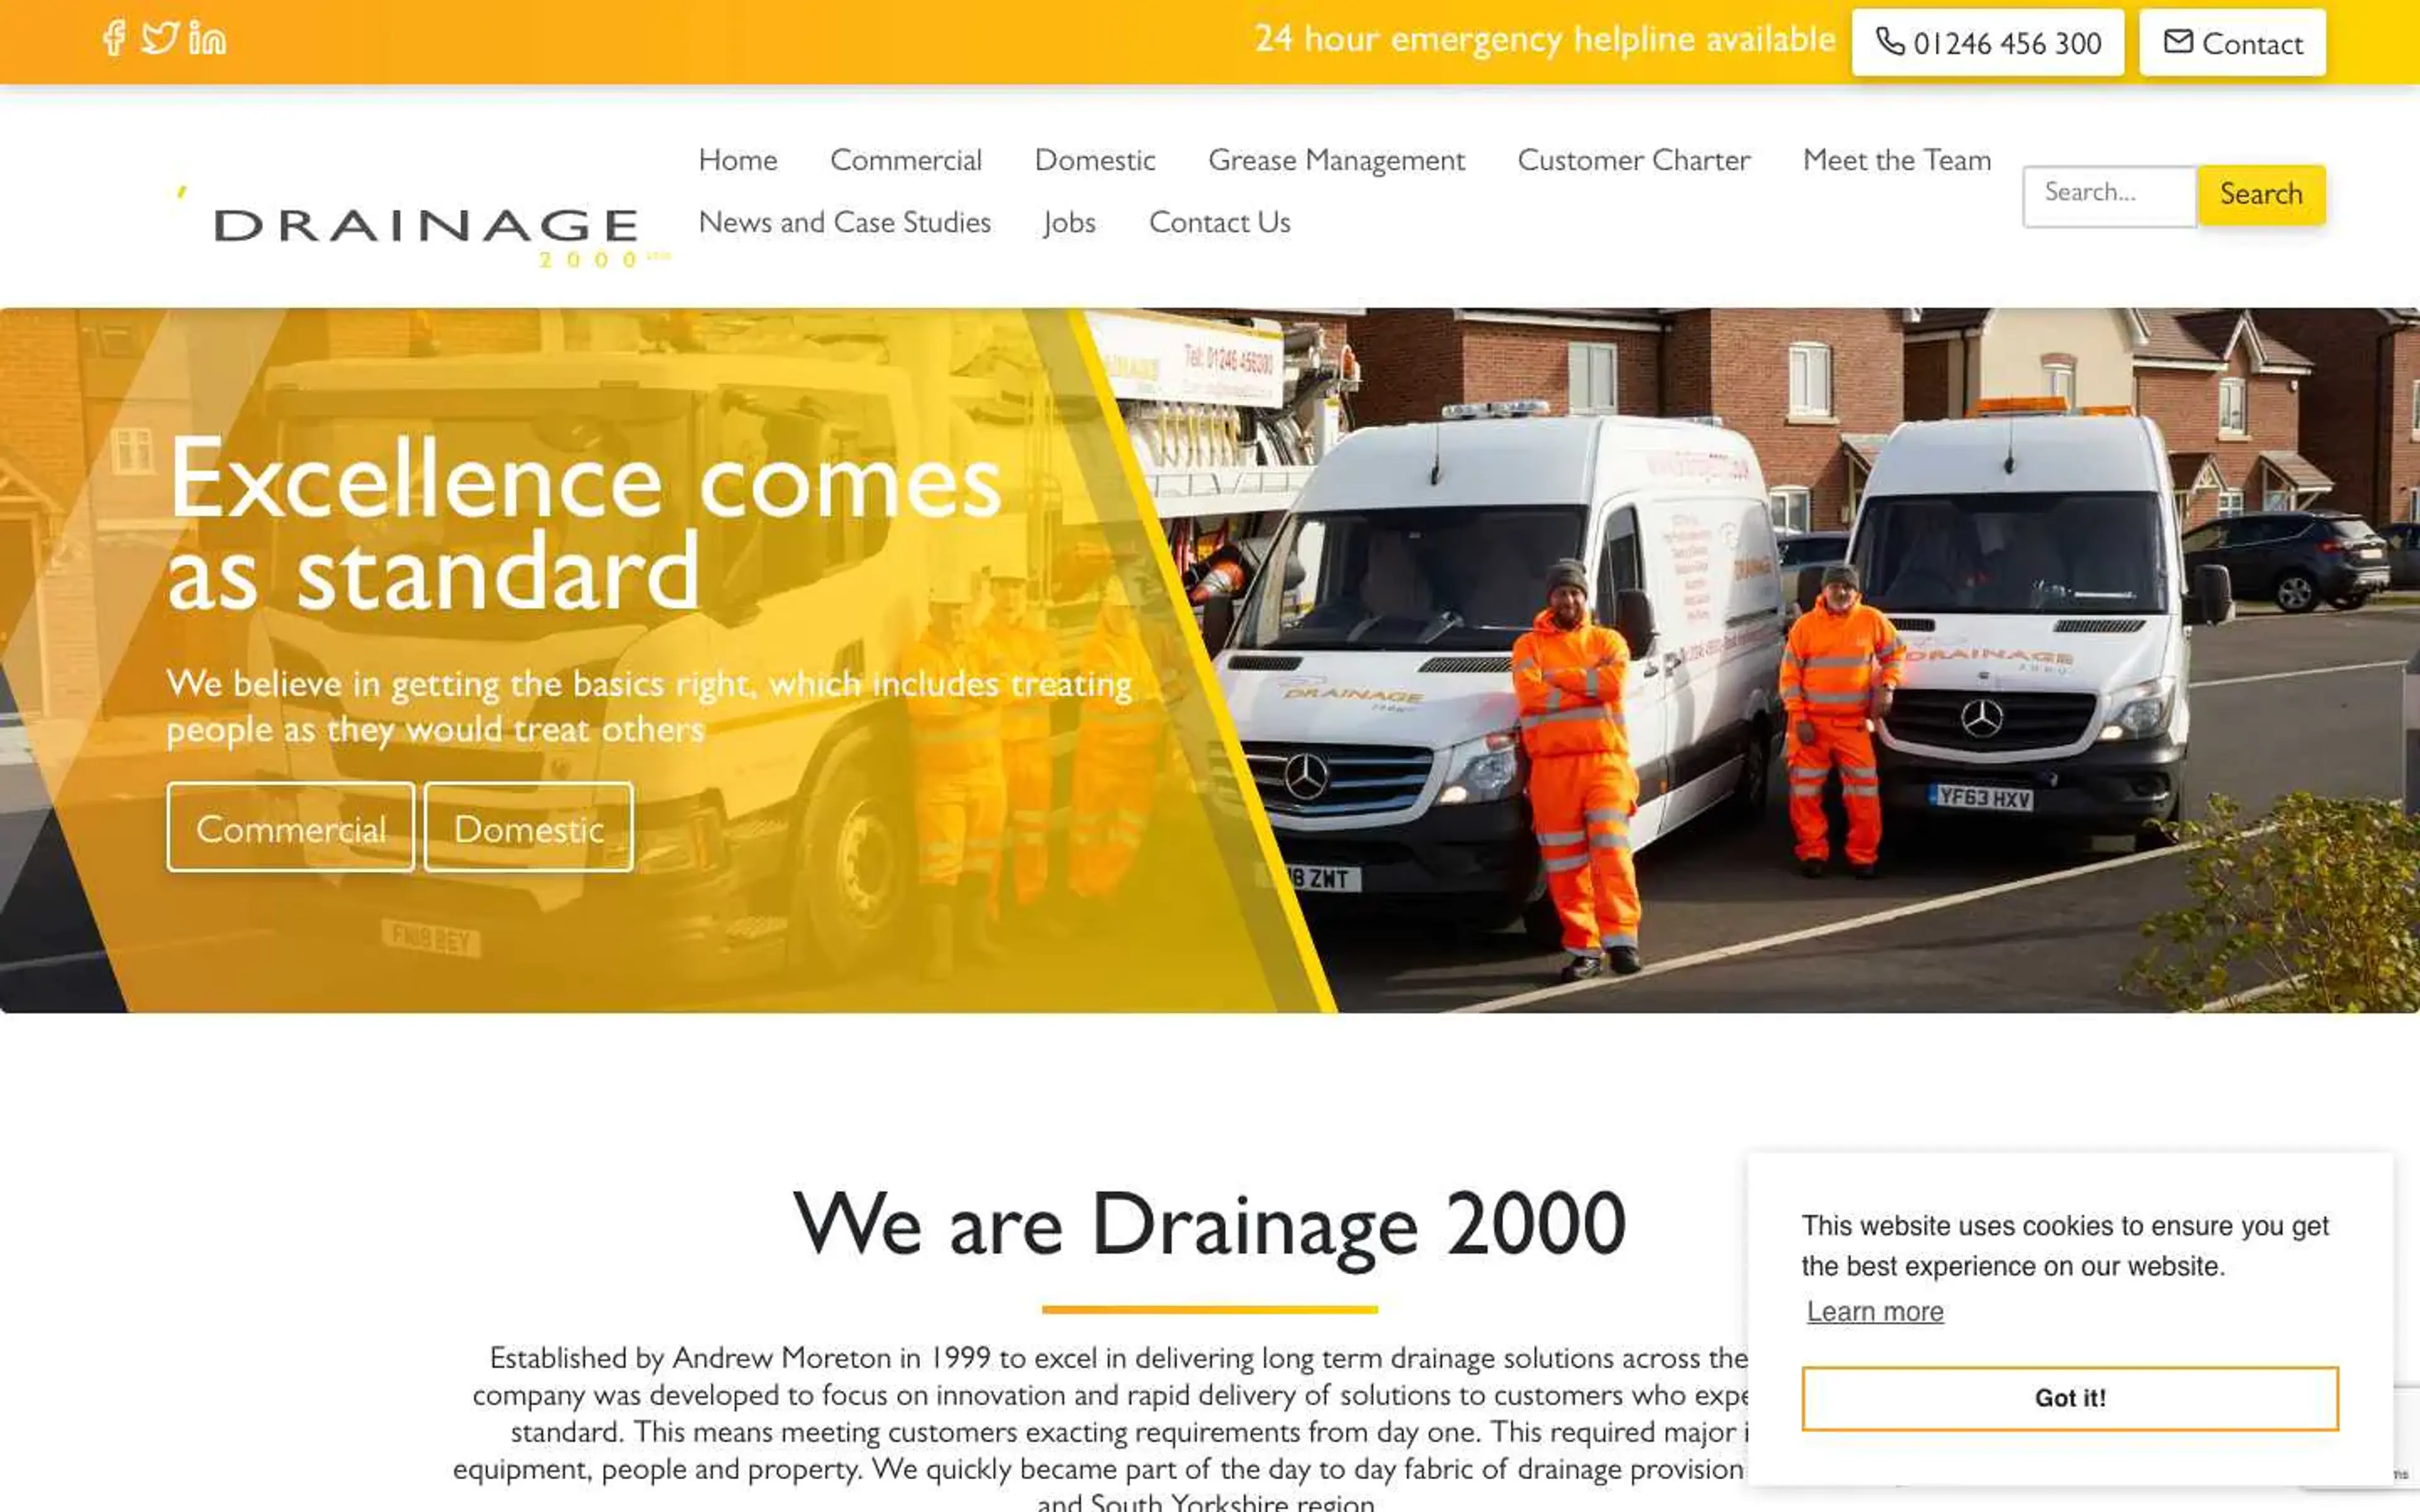 Recent project we worked on for Drainage 2000